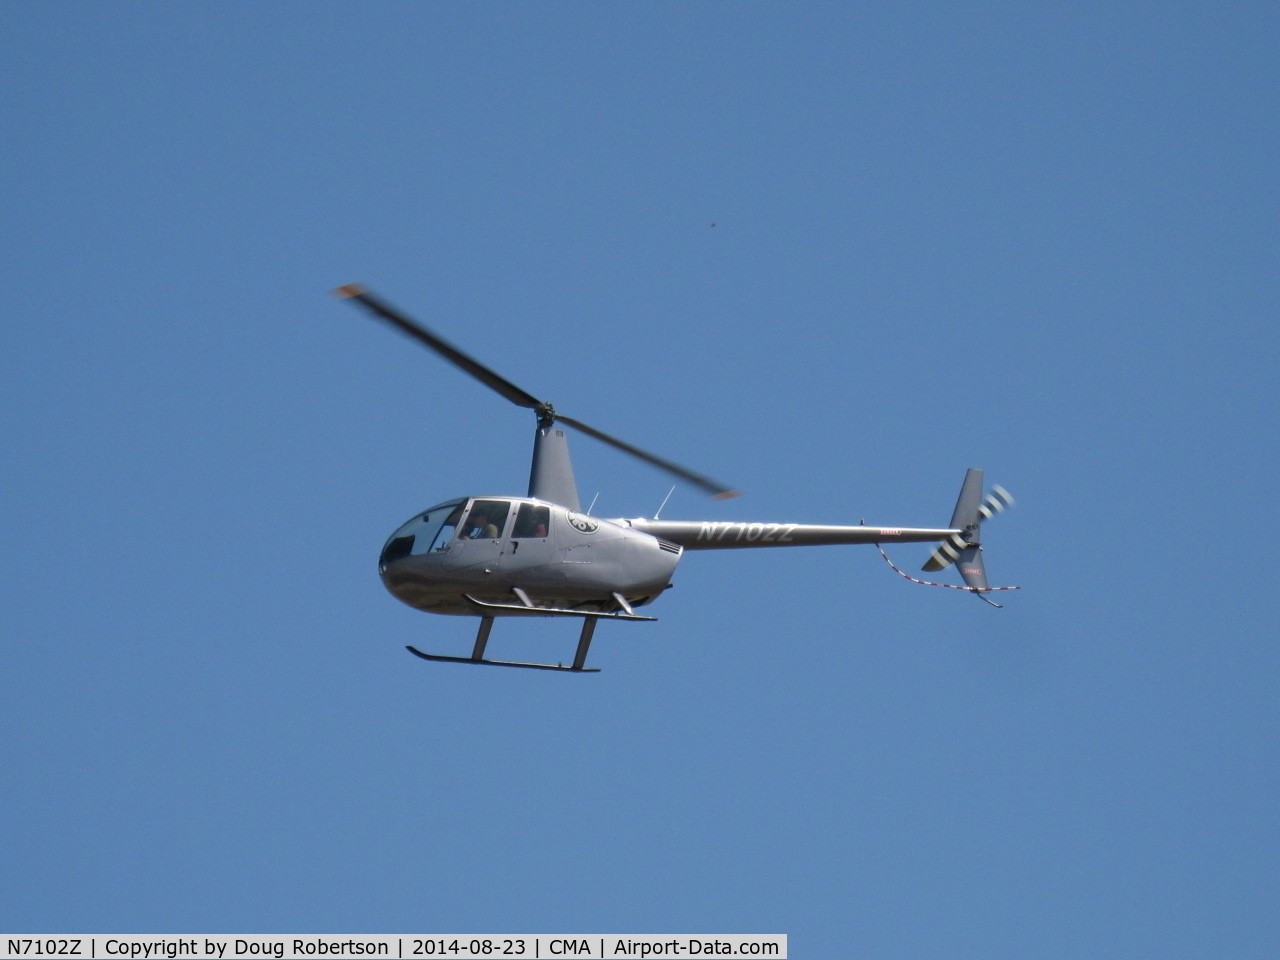 N7102Z, 2013 Robinson R44 C/N 2309, 2013 Robinson R44, Lycoming O-540 260 Hp derated to 225 Hp for takeoff, 205 Hp continuous, another short paid ride at CMA Airshow.